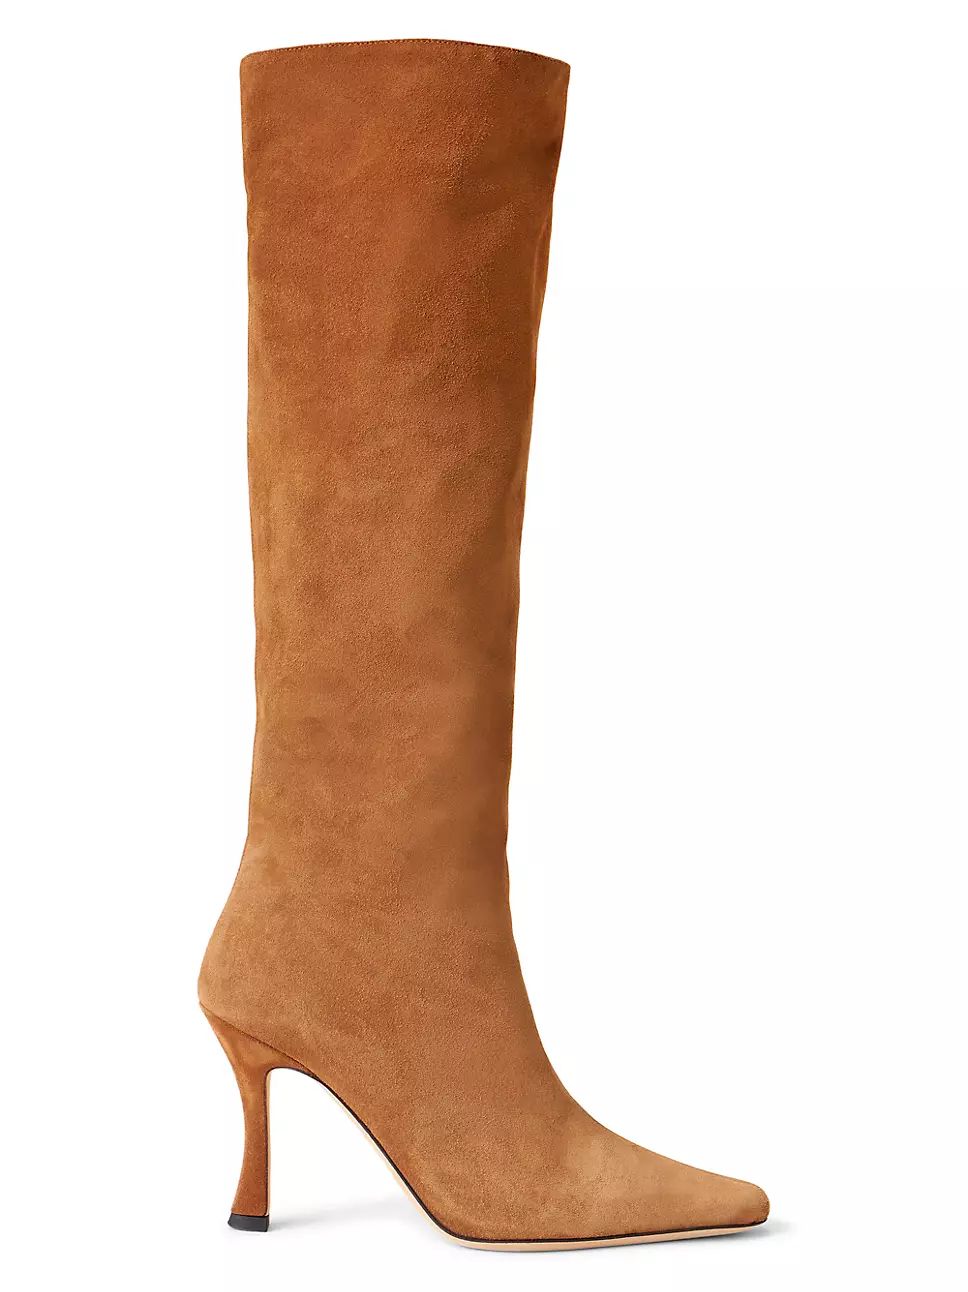 Staud Cami Suede Tall Boots | Saks Fifth Avenue